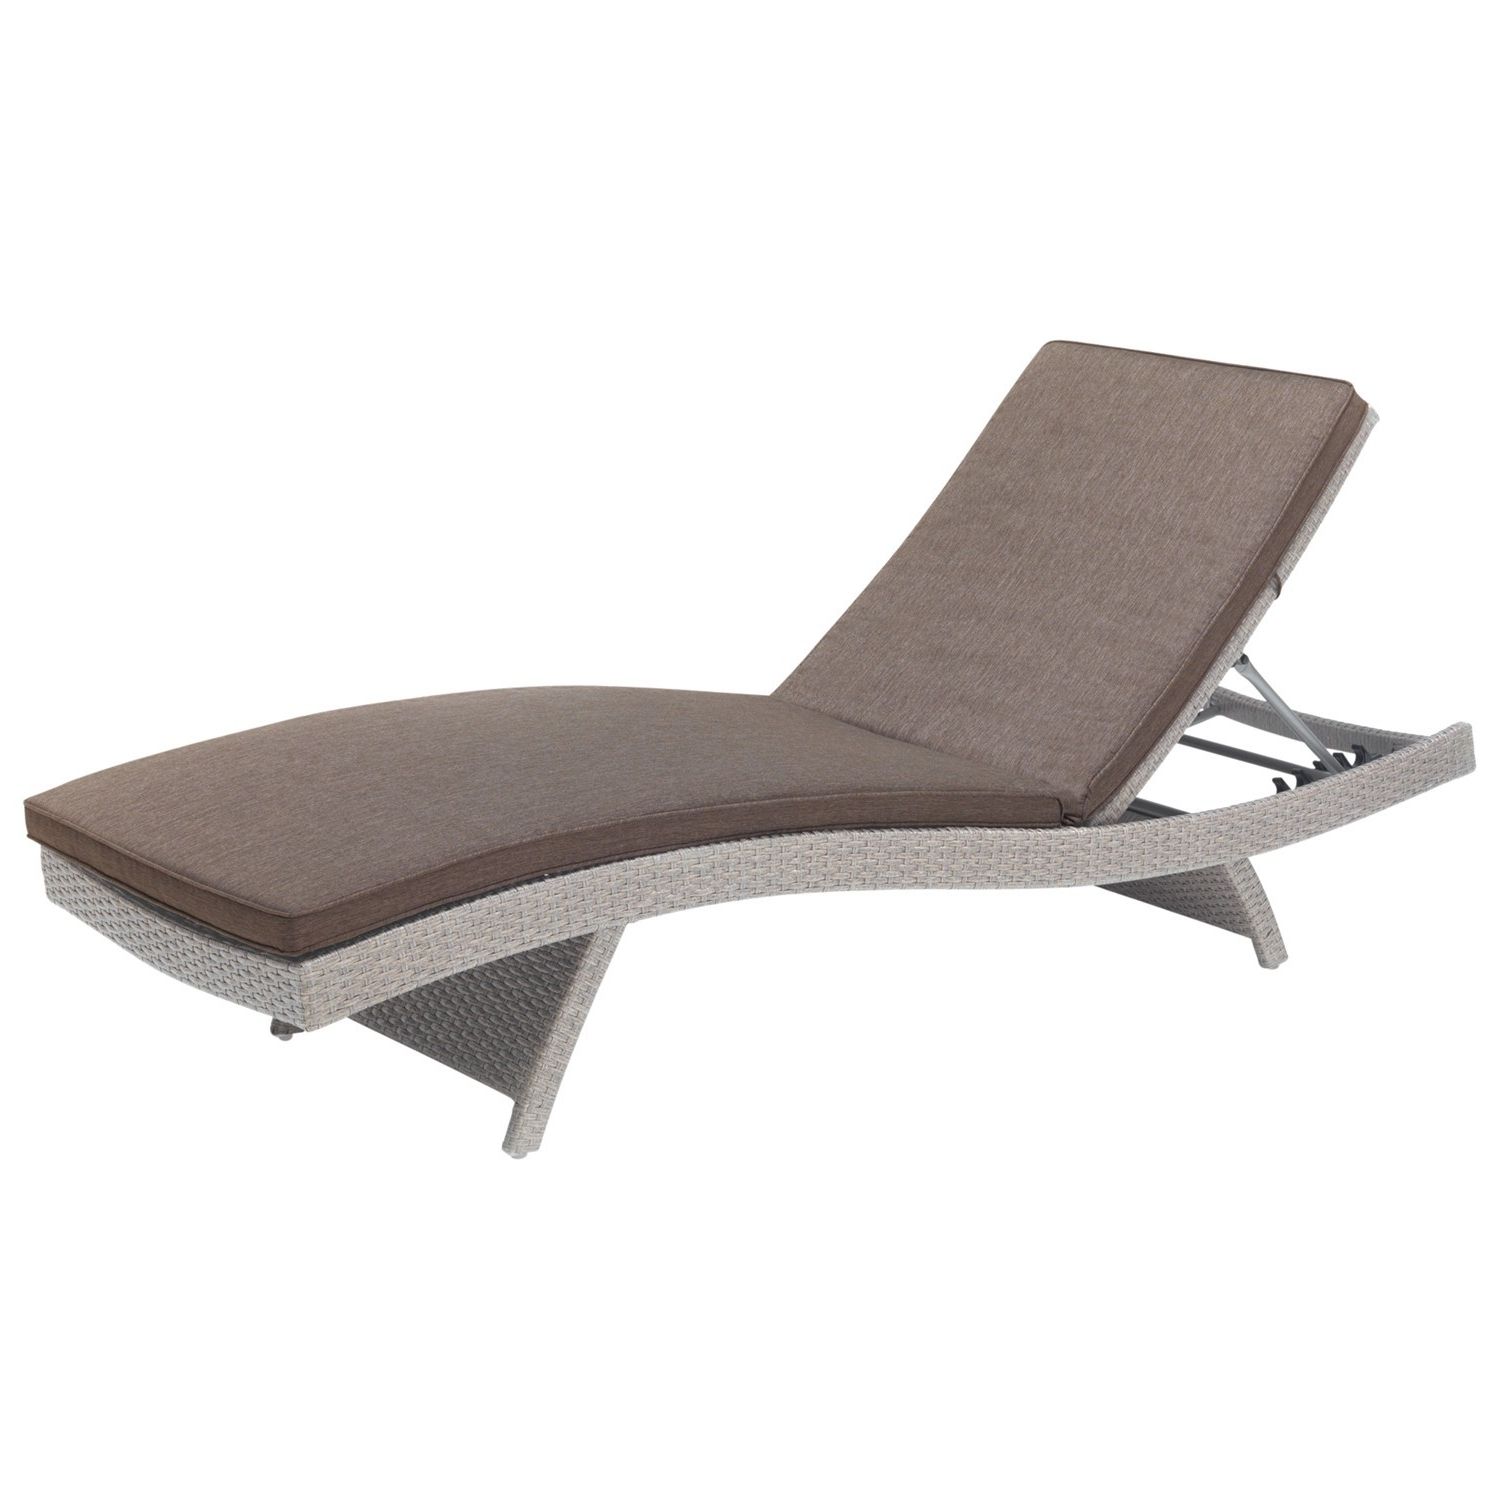 Trendy Kettler Universal Sun Lounger – White Wash With Taupe Cushion From Pertaining To Kettler Chaise Lounge Chairs (View 9 of 15)